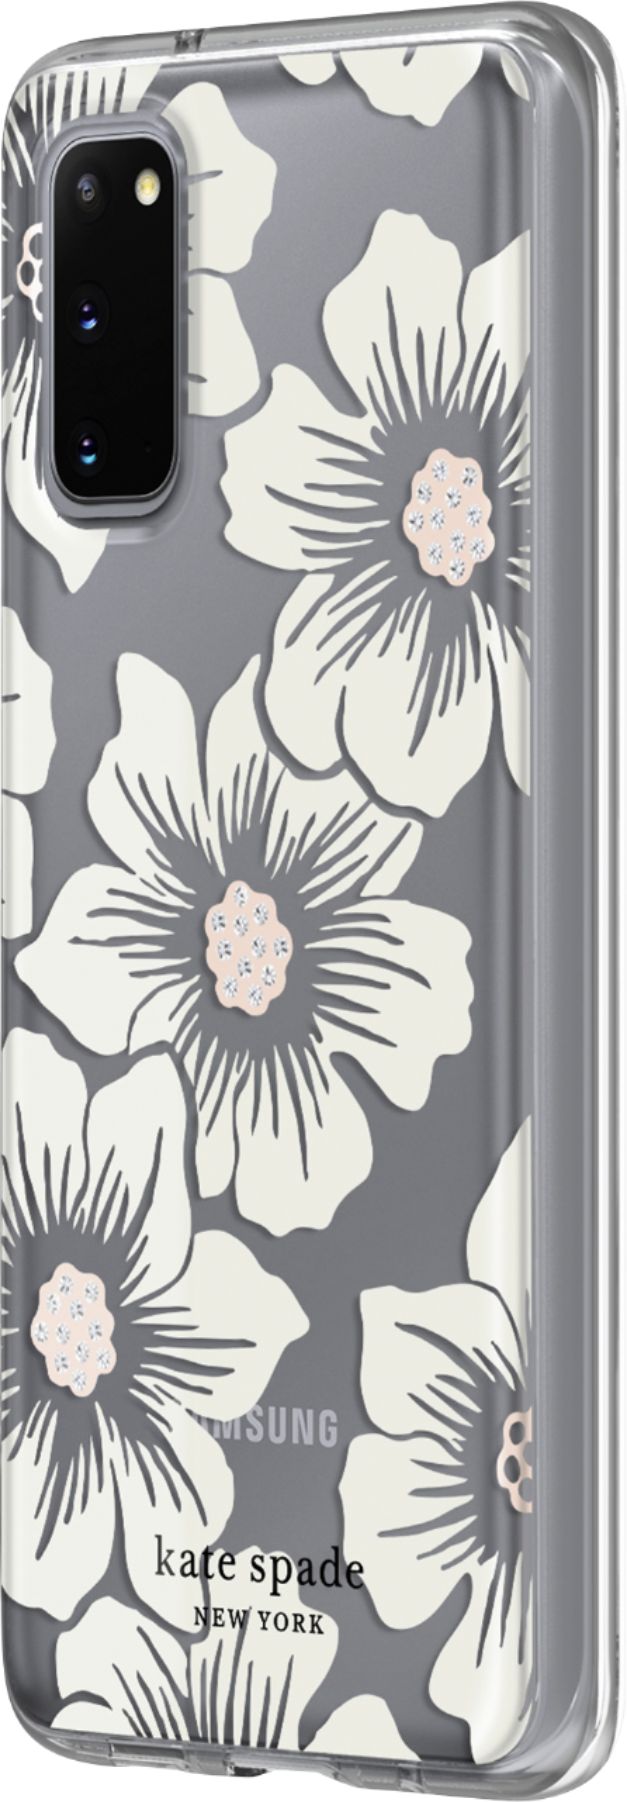 Left View: kate spade new york - Protective Hard-Shell Case for Samsung Galaxy S20 5G - Hollyhock Floral Clear/Cream With Stones